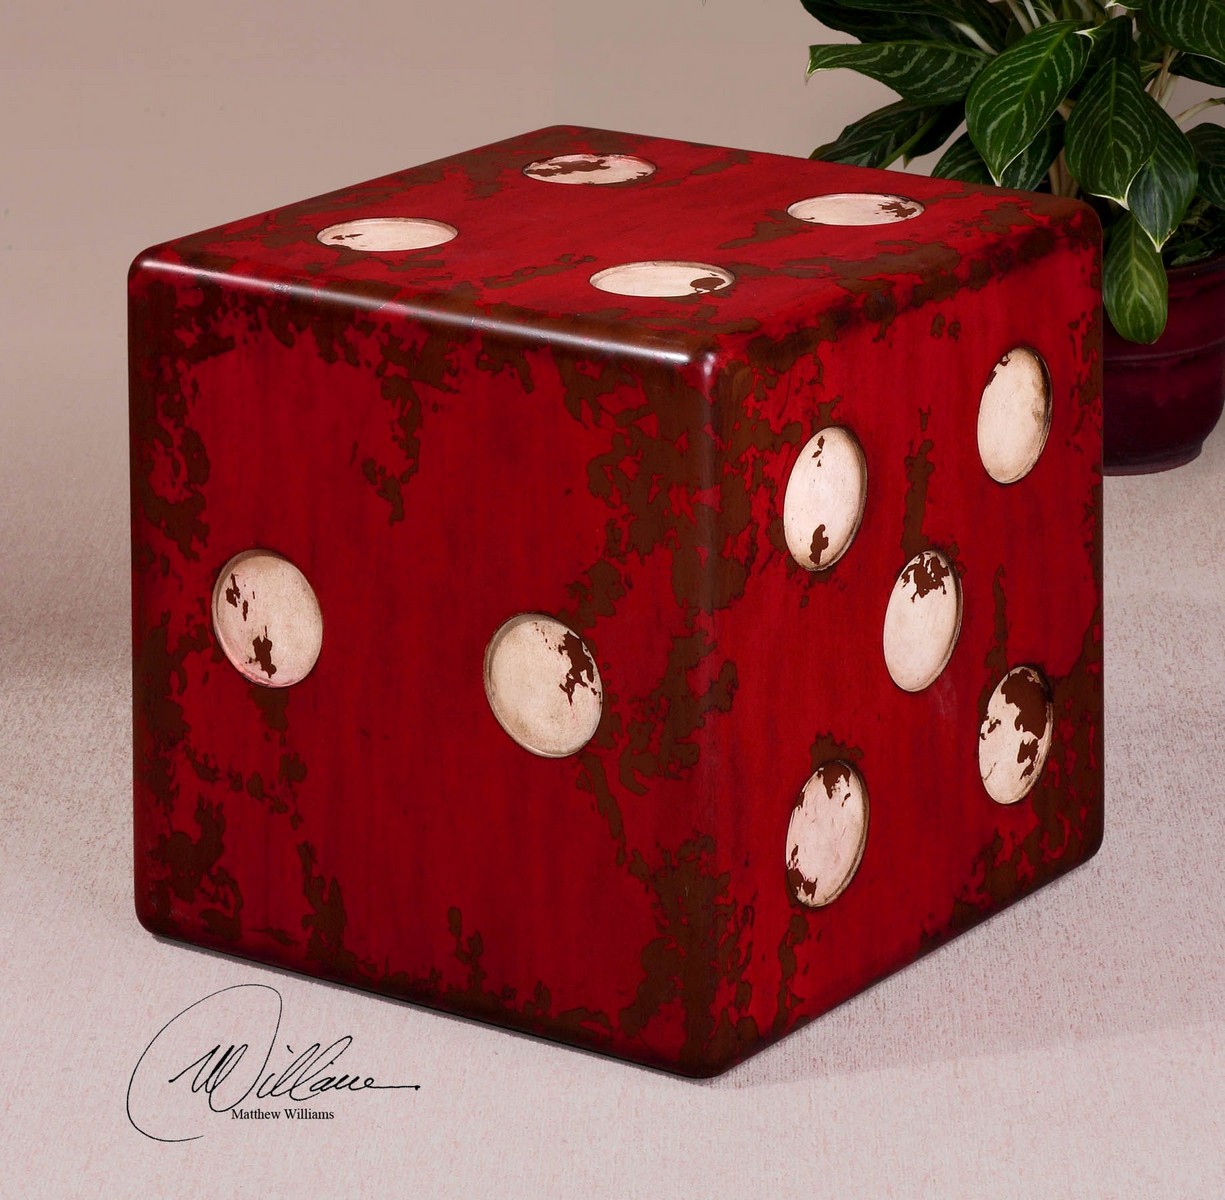 Uttermost Dice Red Accent Table